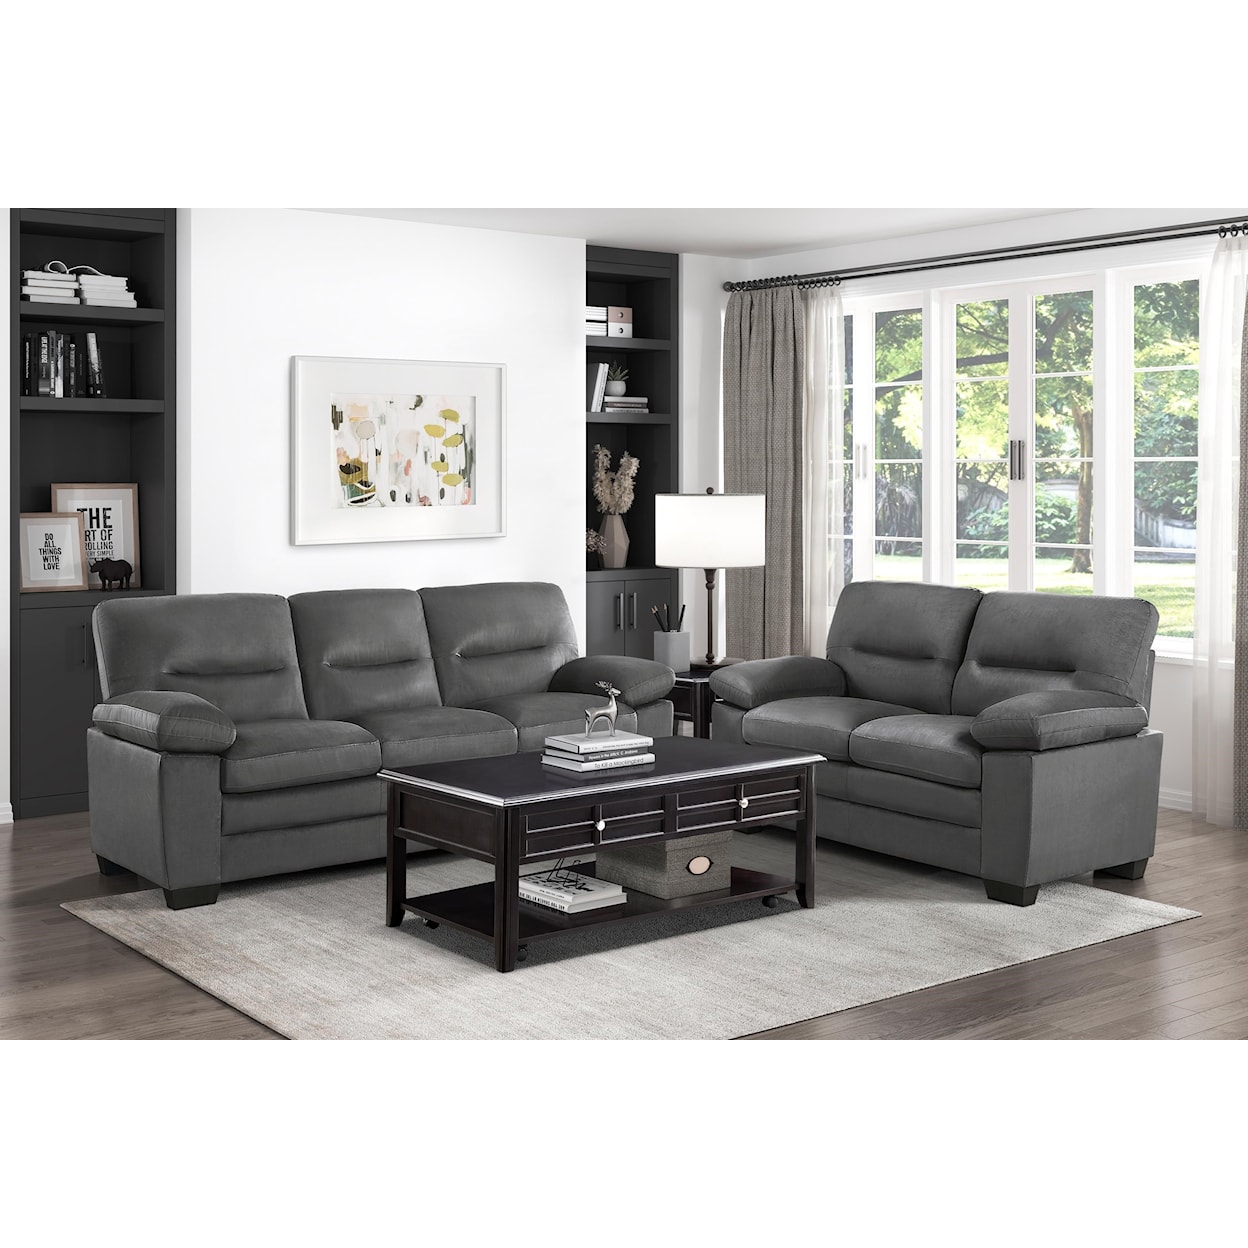 Homelegance Furniture Keighly SOFA AND LOVESEAT